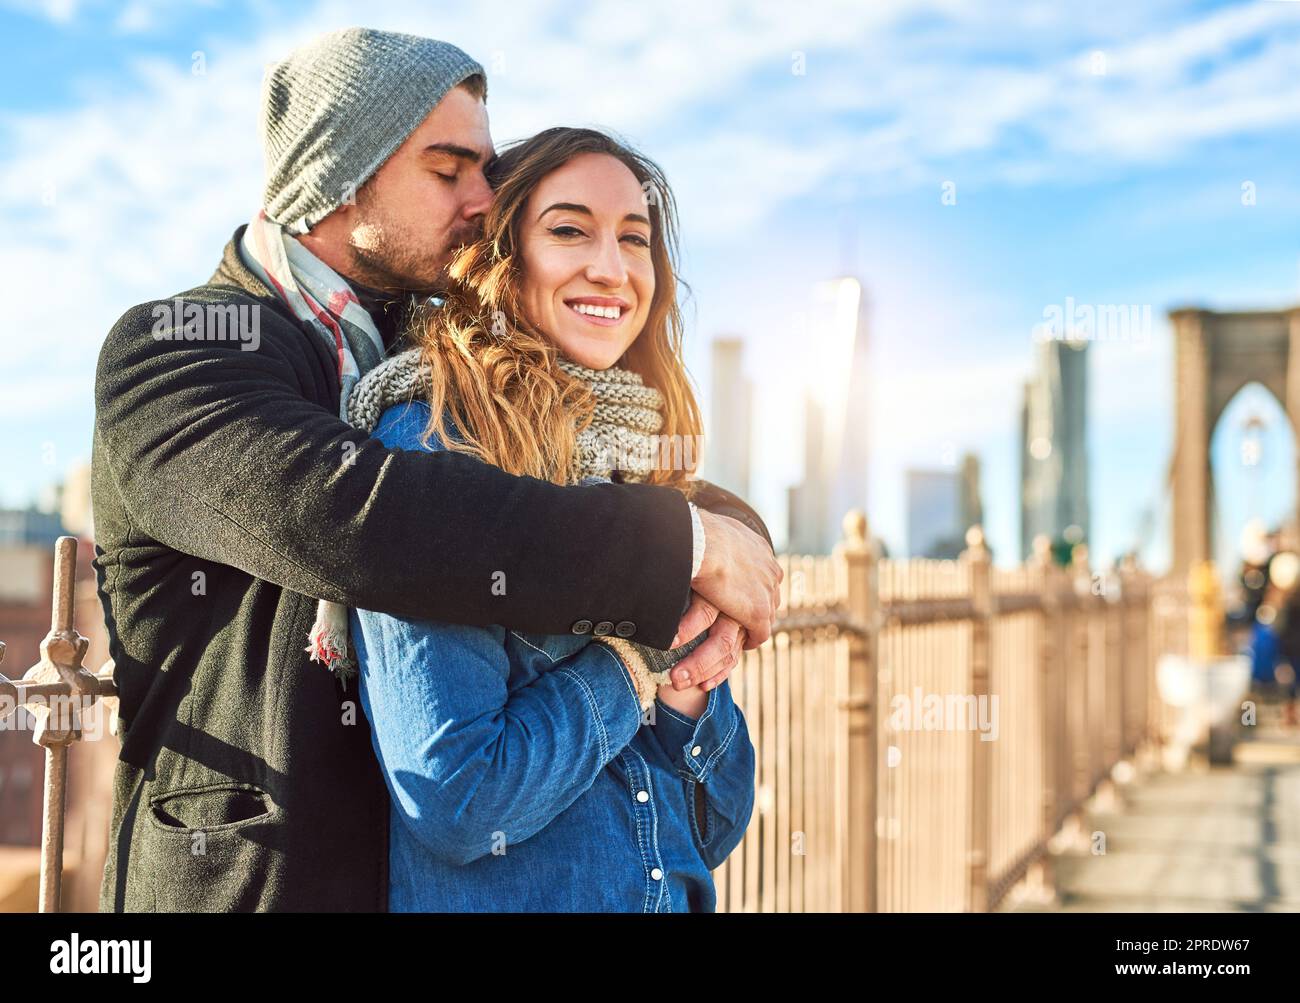 Seeing her smile is all I want. an affectionate young couple enjoying their foreign getaway. Stock Photo